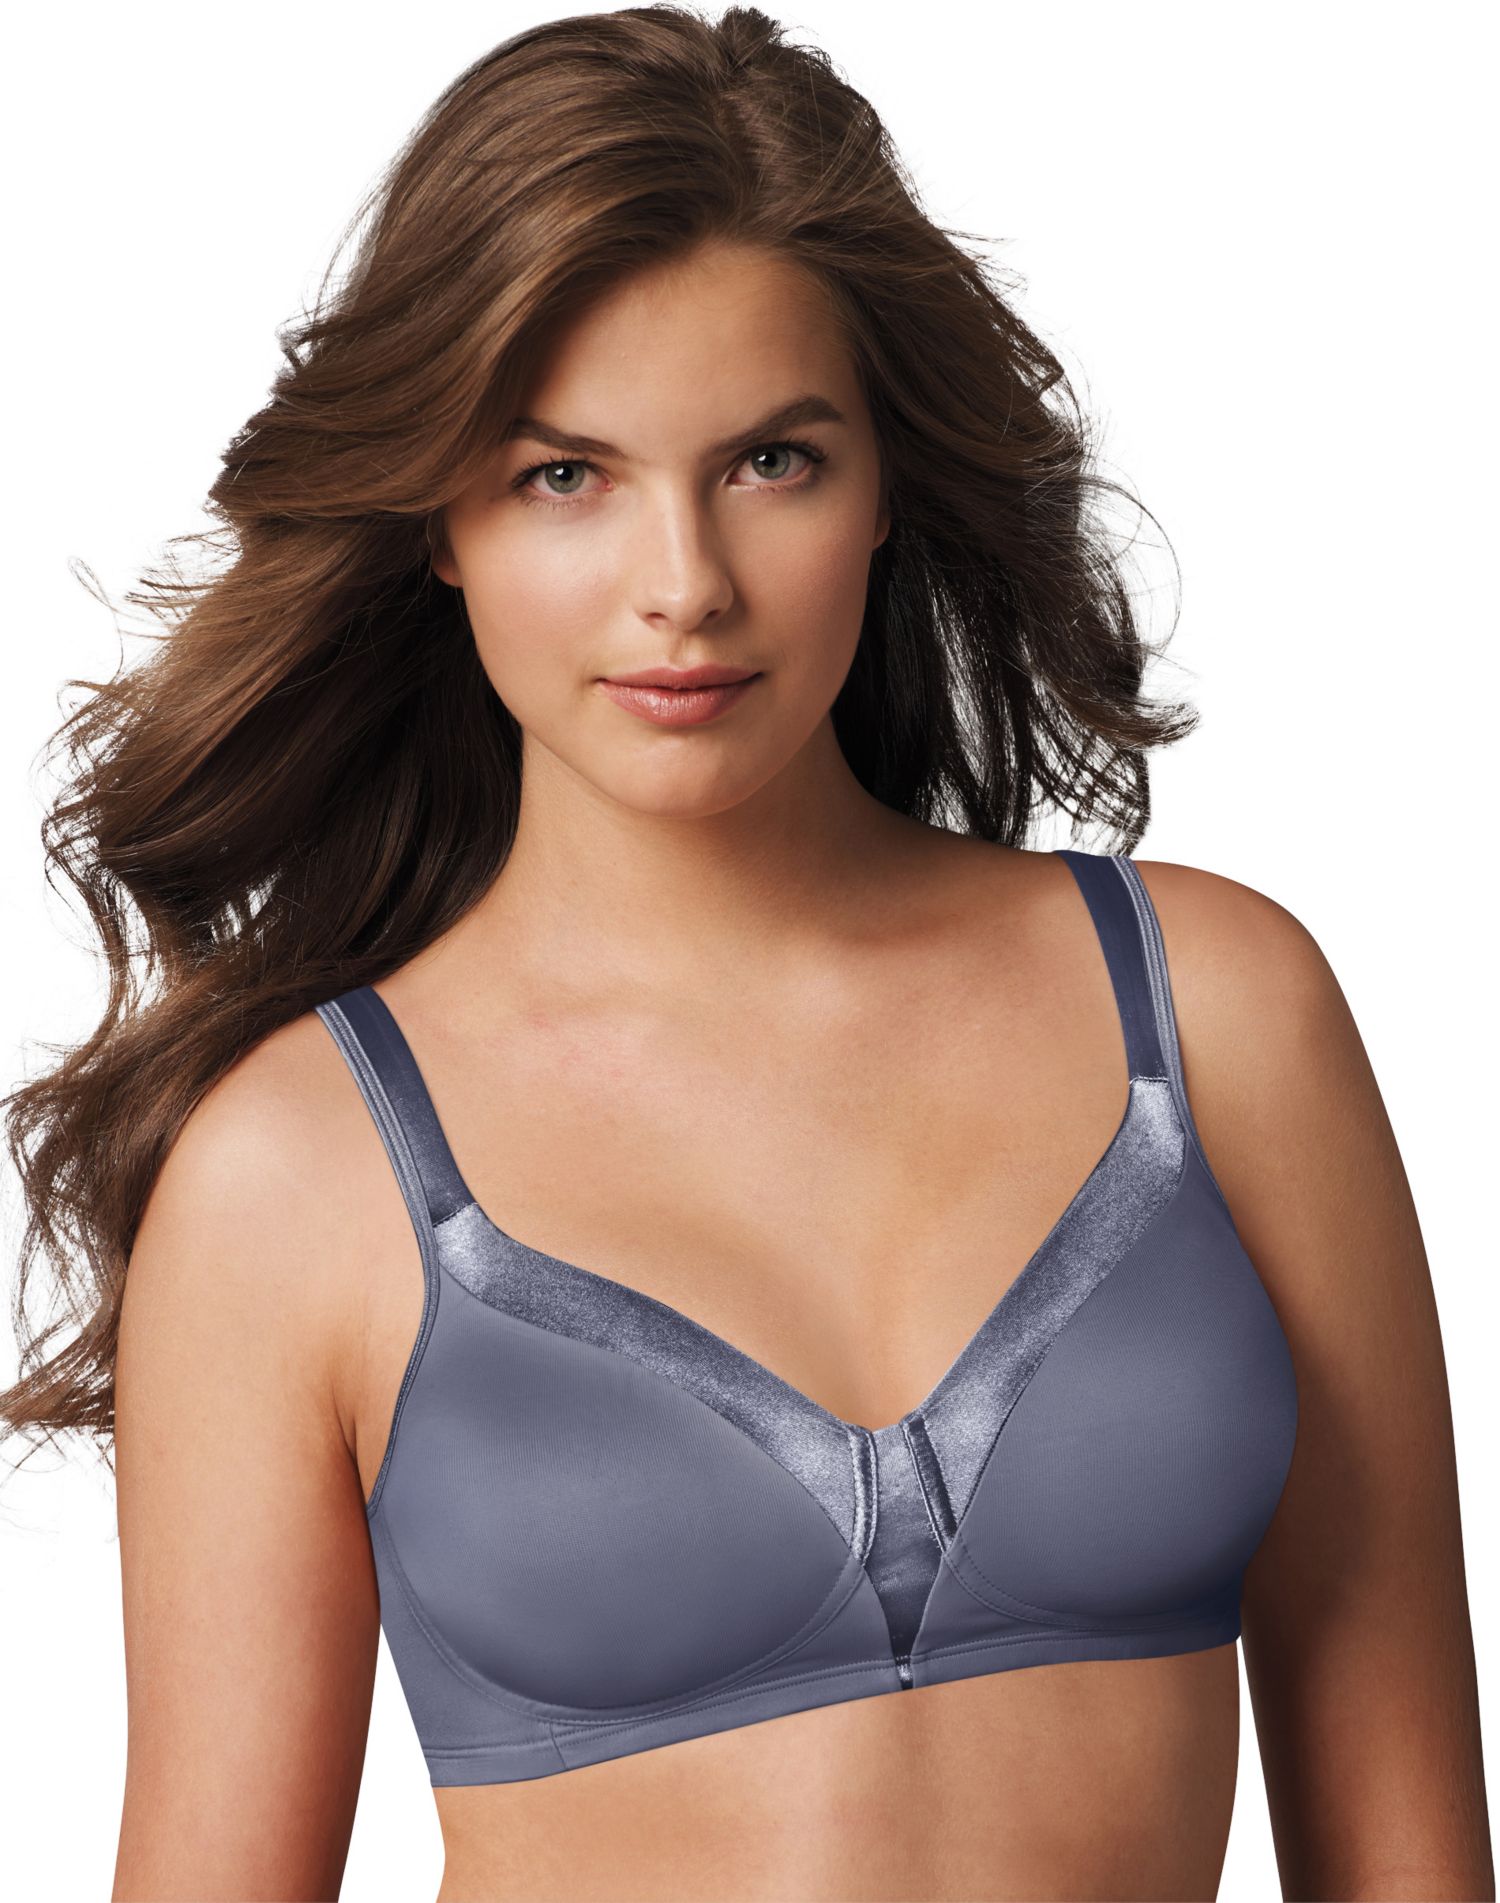 18 Hour Smoothing Minimizer Wirefree Bra Black 38D by Playtex